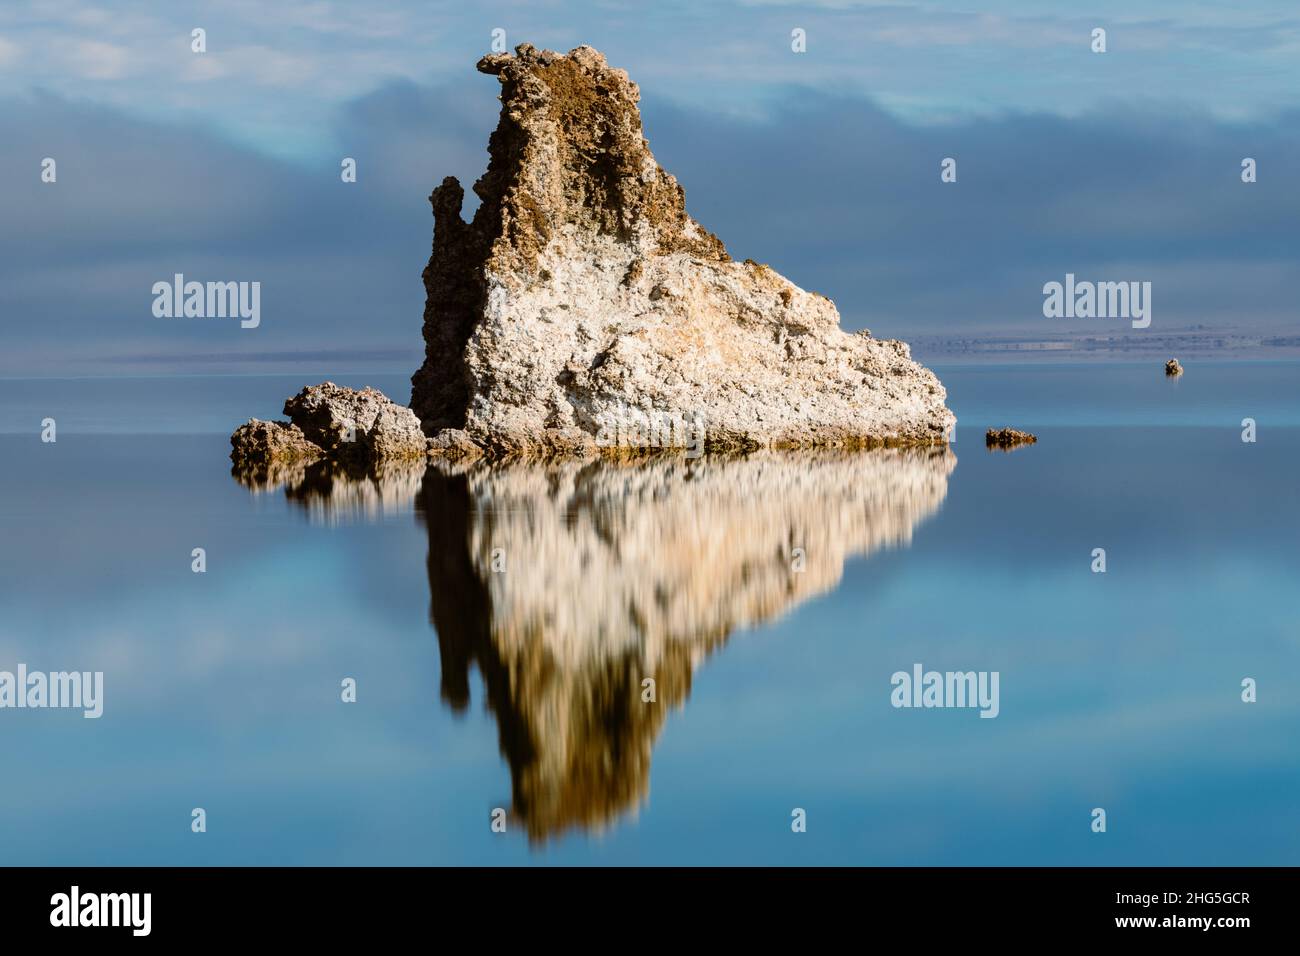 Large tufa formation in Mono Lake in Mono County, California, USA.   Image features reflections in calm water and low clouds/fog in the background. Stock Photo